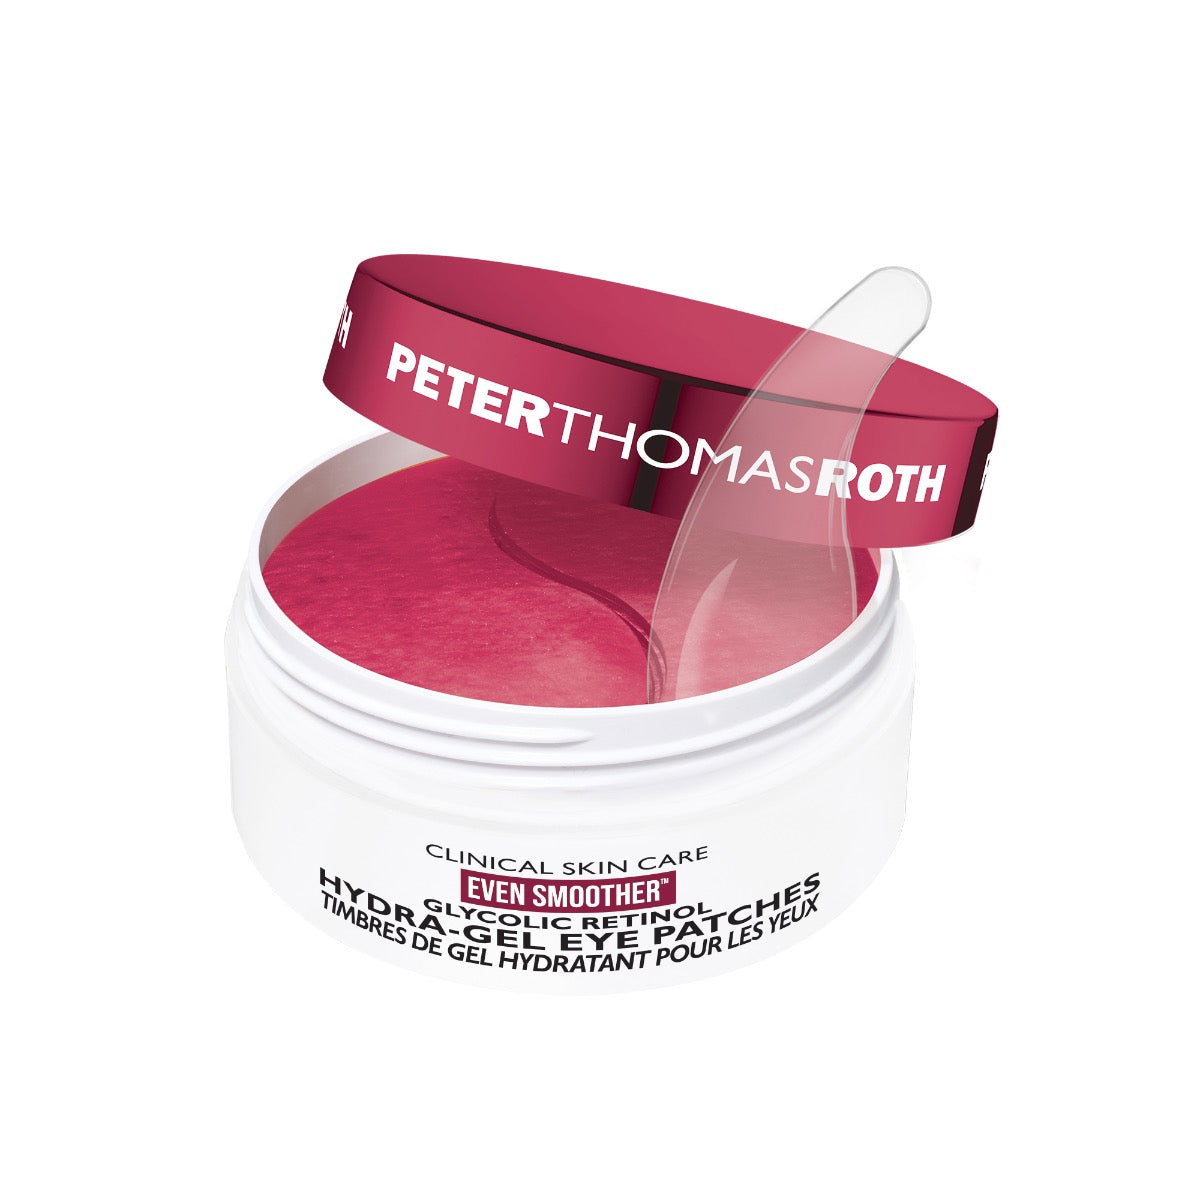 Peter Thomas Roth Even Smoother Glycolic Retinol Hydra-Gel Eye Patches 60 Ct